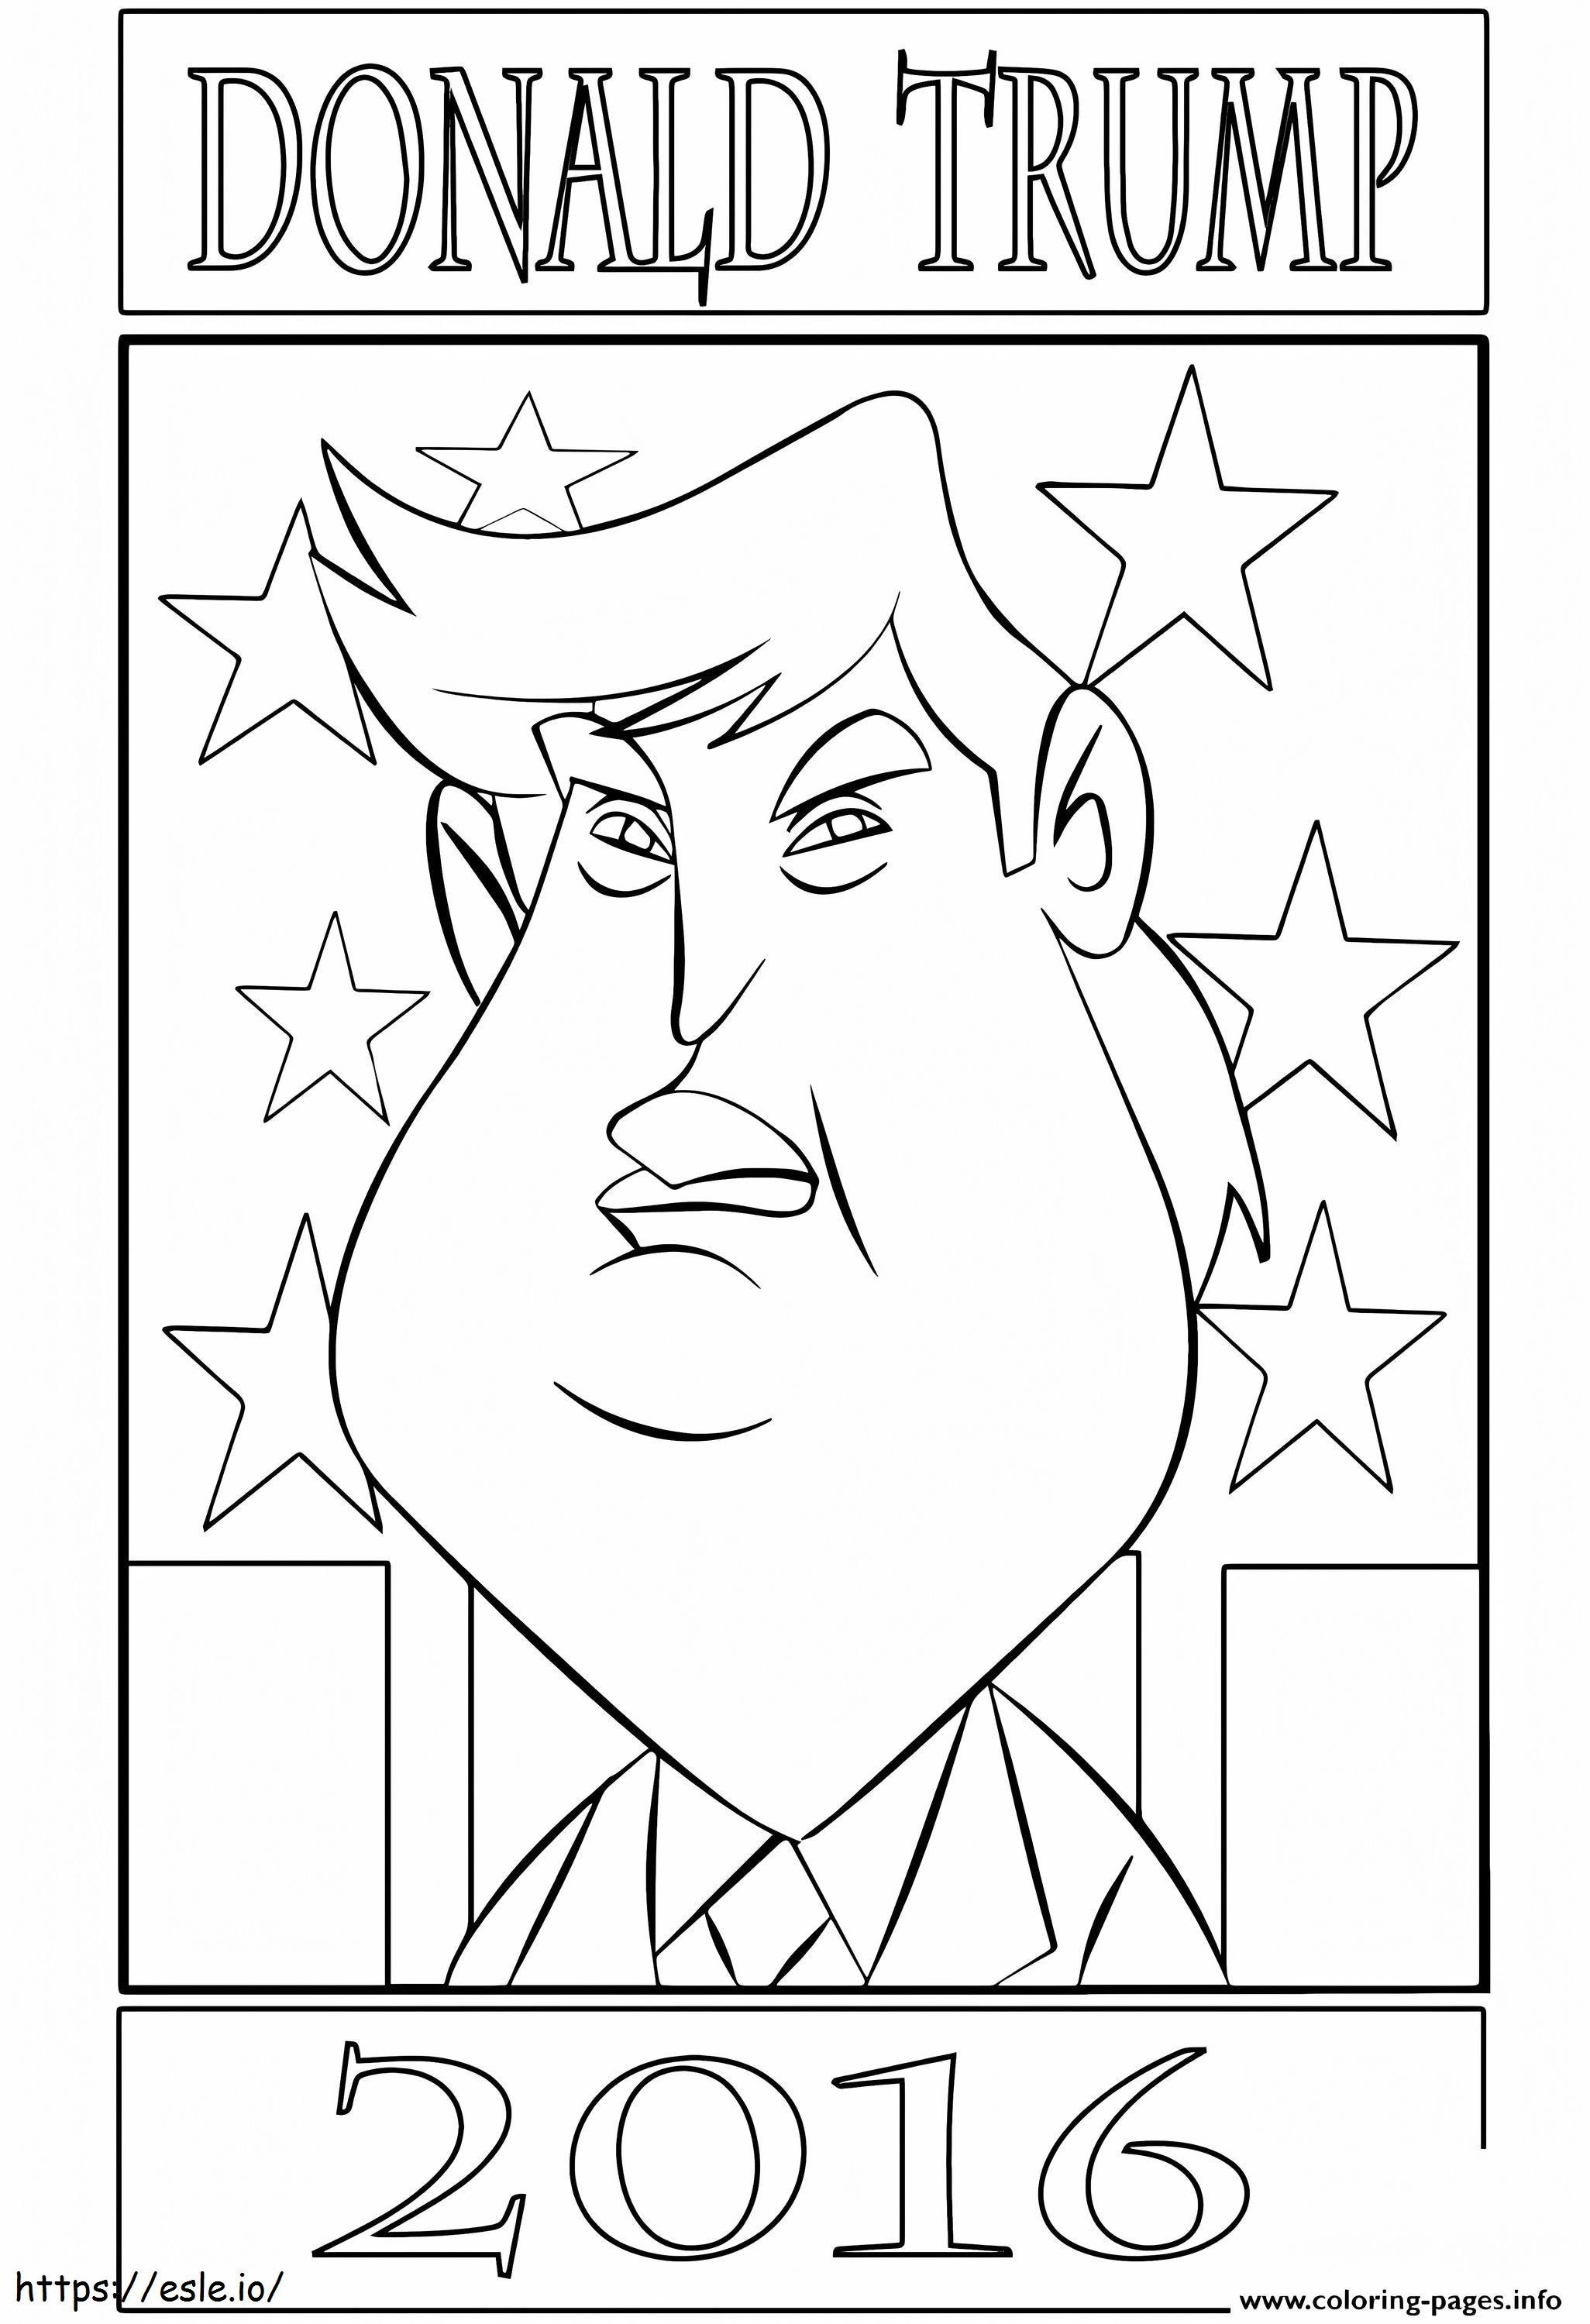 1541130150 1477414774Donald Trump 2016 coloring page